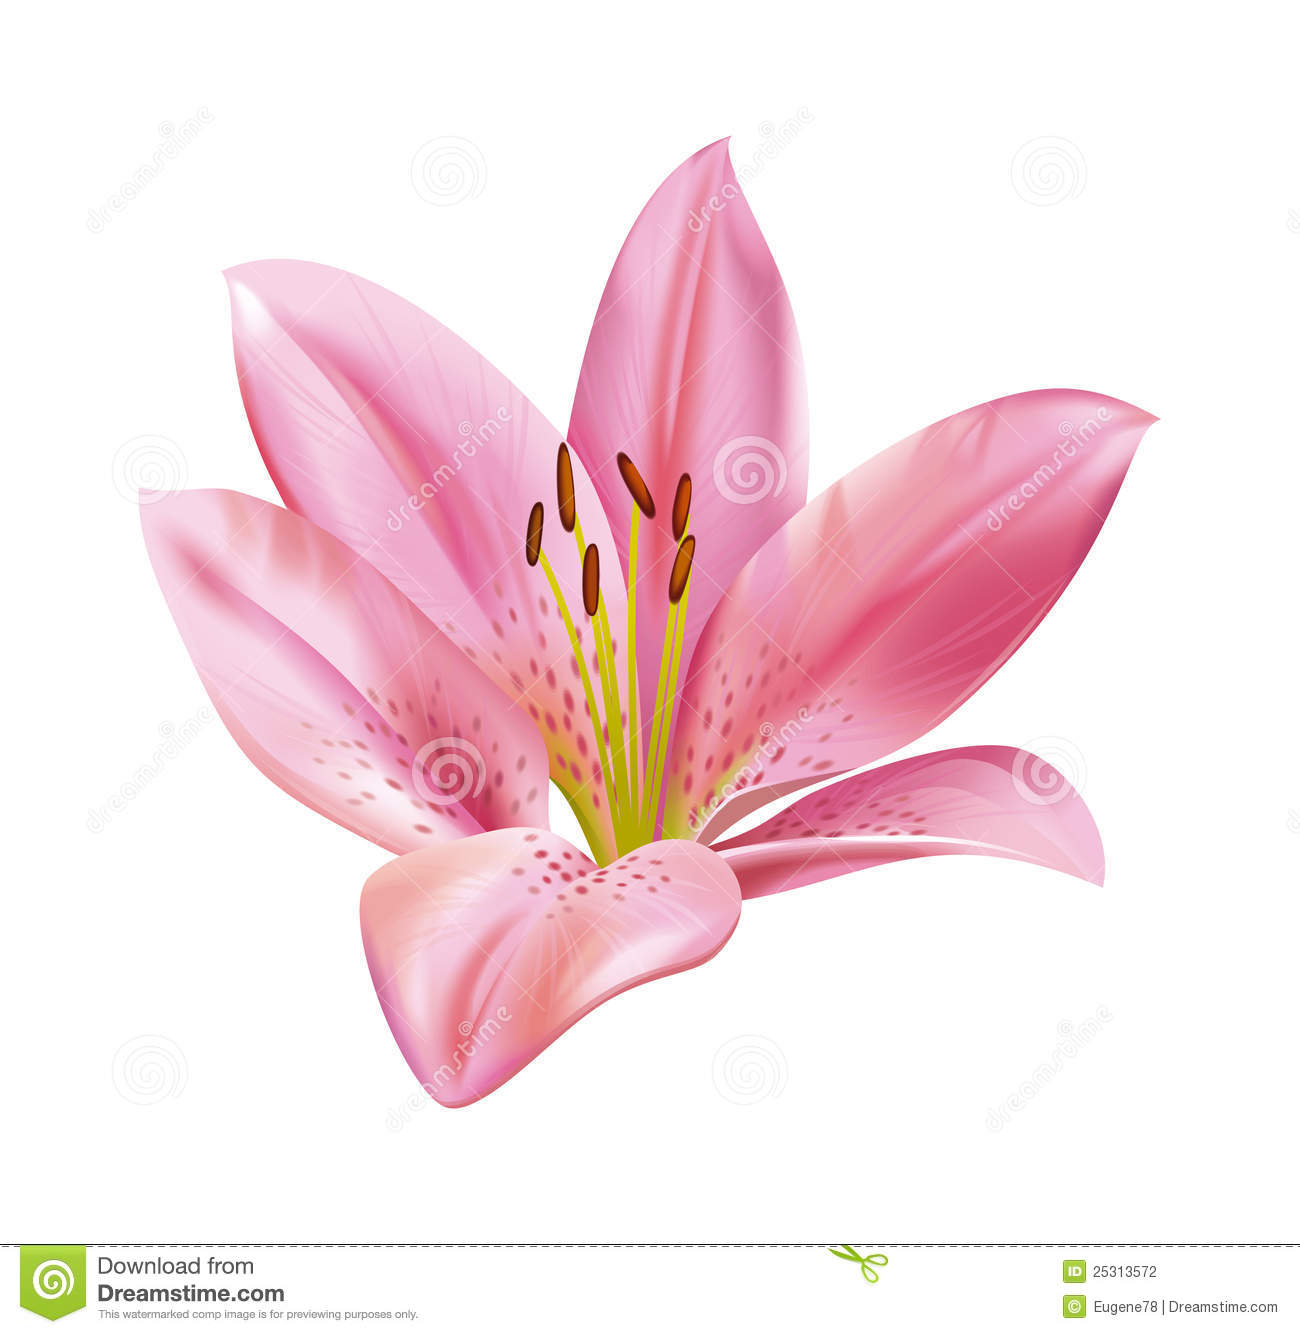 Pink Lily clipart #11, Download drawings